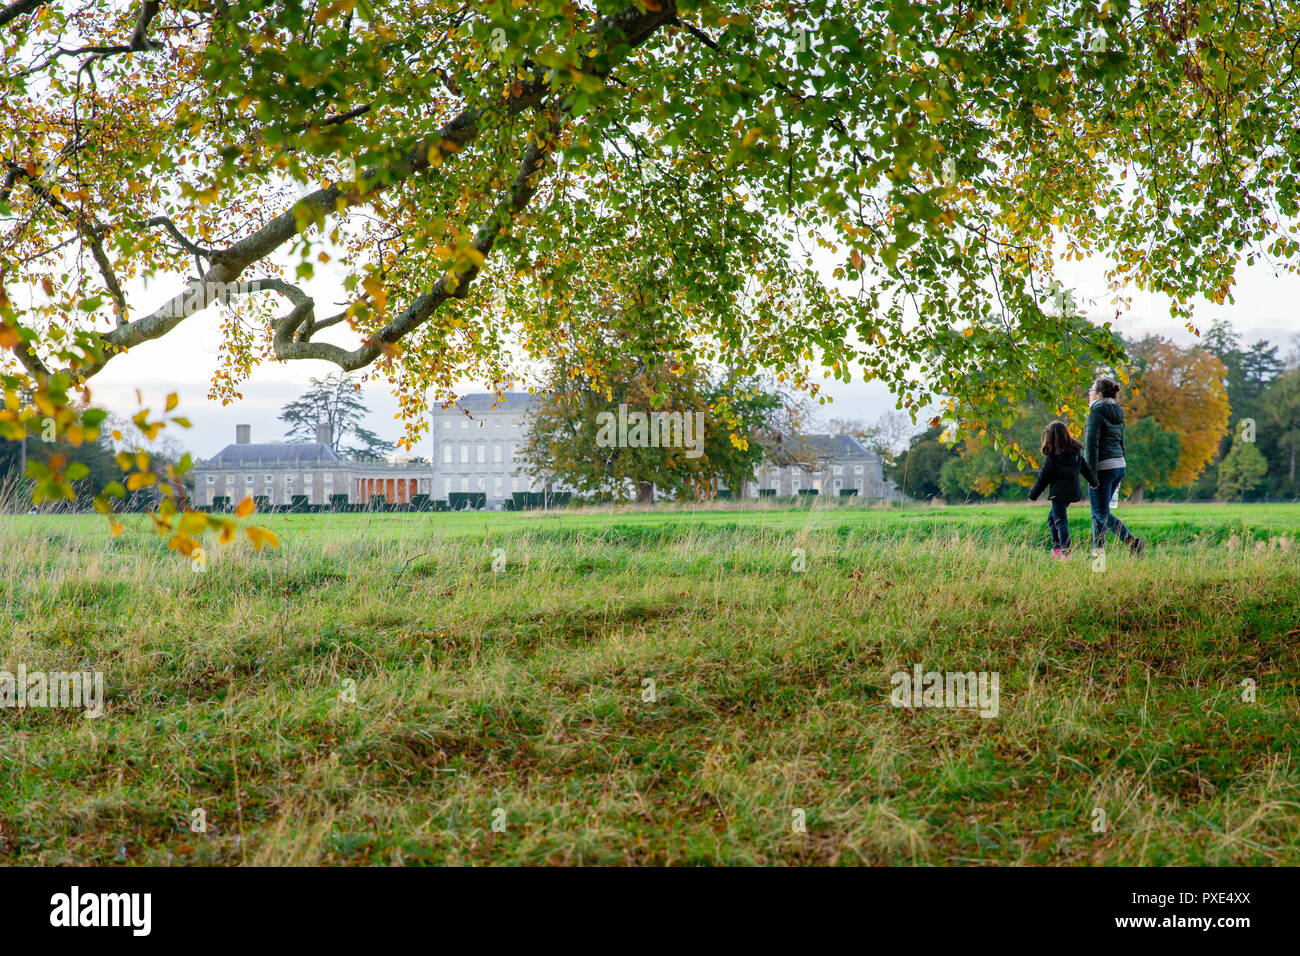 Celbridge, Kildare, Ireland: 21st October 2018. Ireland Weather: Beatuful Sunday afternoon with warm sunny spells  after wet morning. Autumn in full swing in the Castletown Park. Credit: Michael Grubka/Alamy Live News Stock Photo